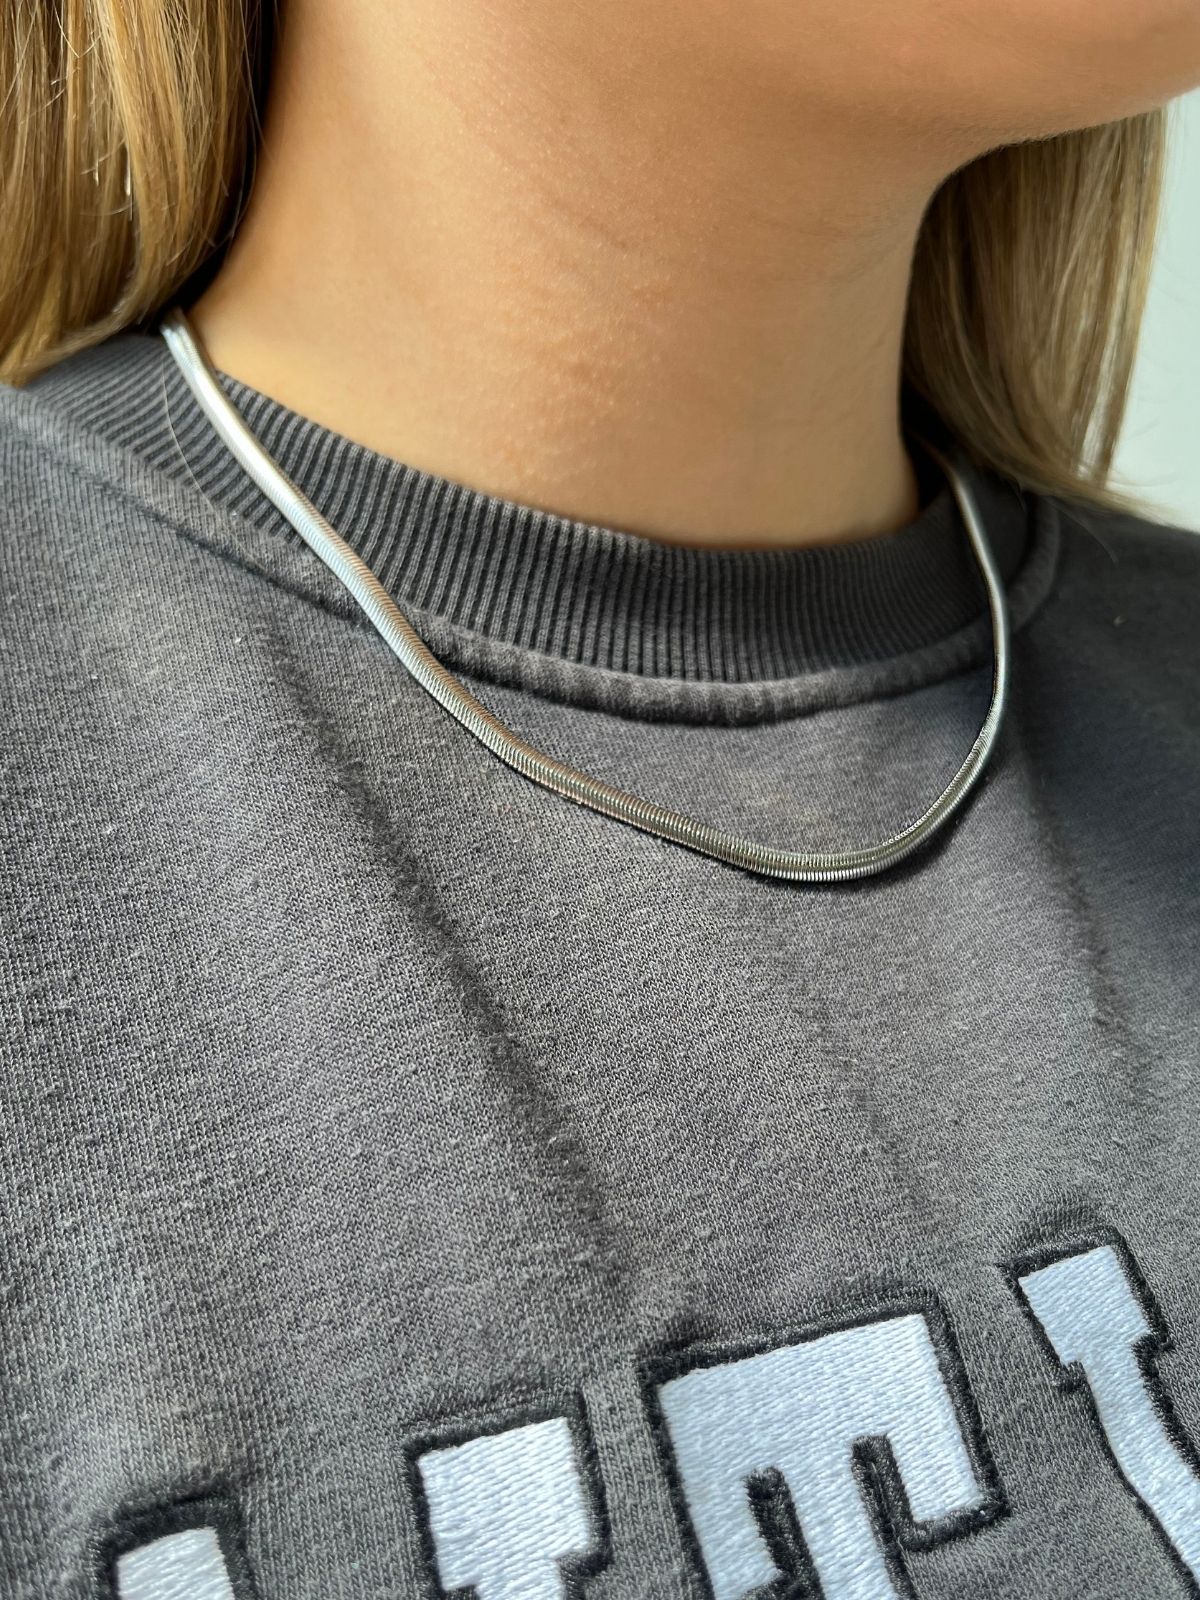 Snake Chain / Silver